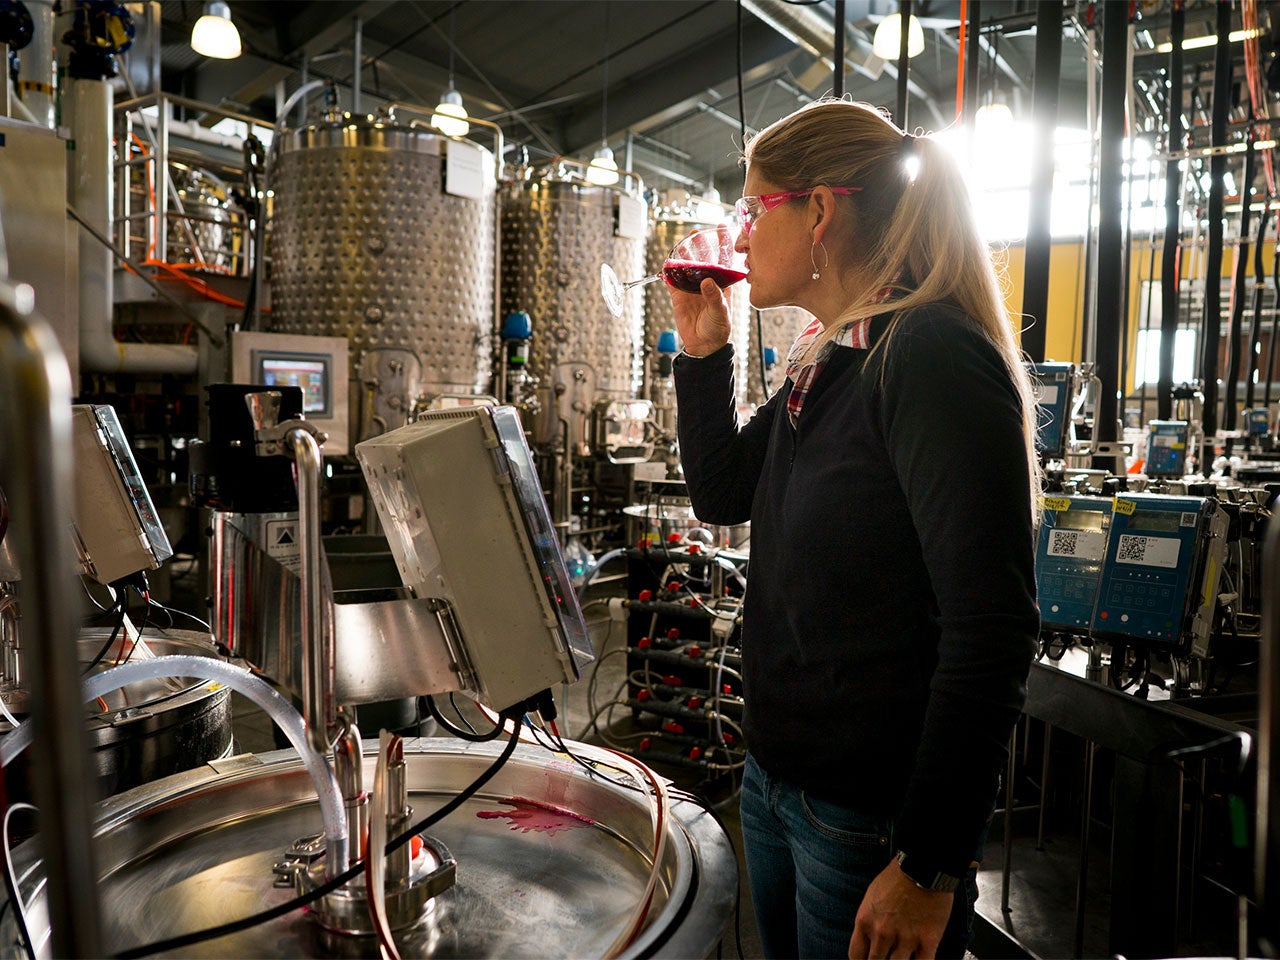 A blonde woman in safety glasses drinks a glass of wine surrounded by equipment